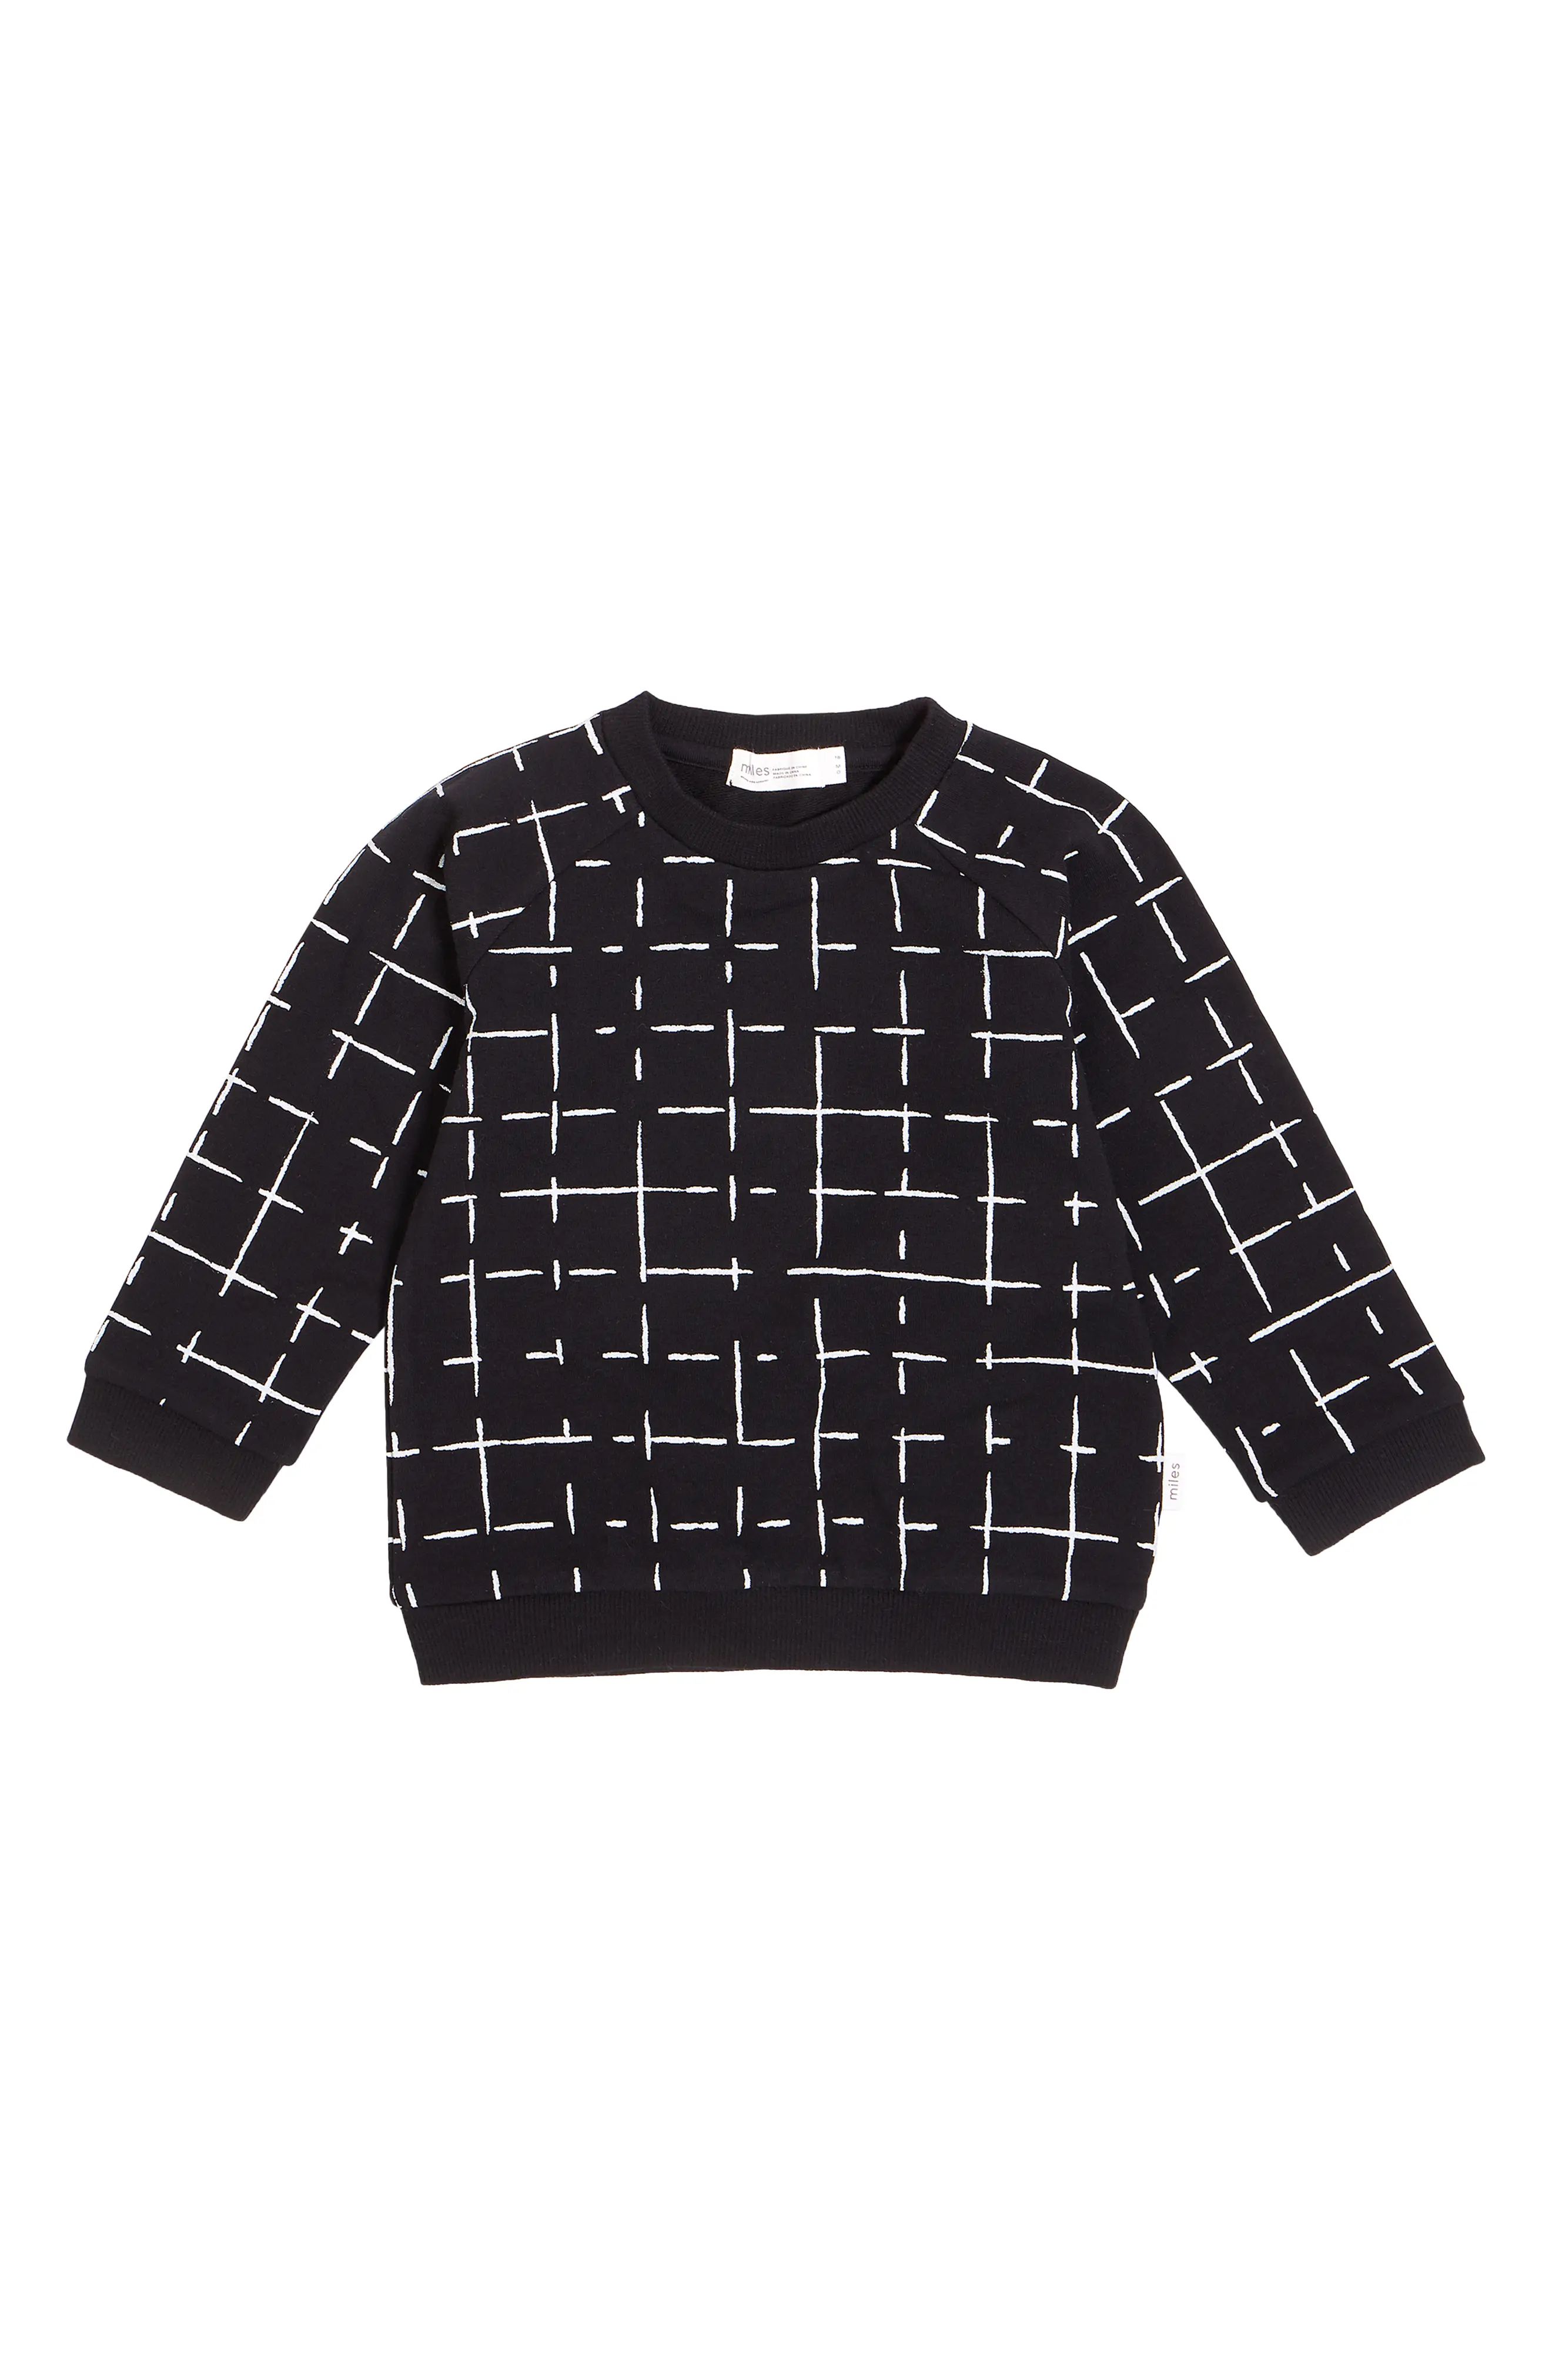 MILES THE LABEL miles Graphic Sweatshirt in Black at Nordstrom, Size 3M | Nordstrom